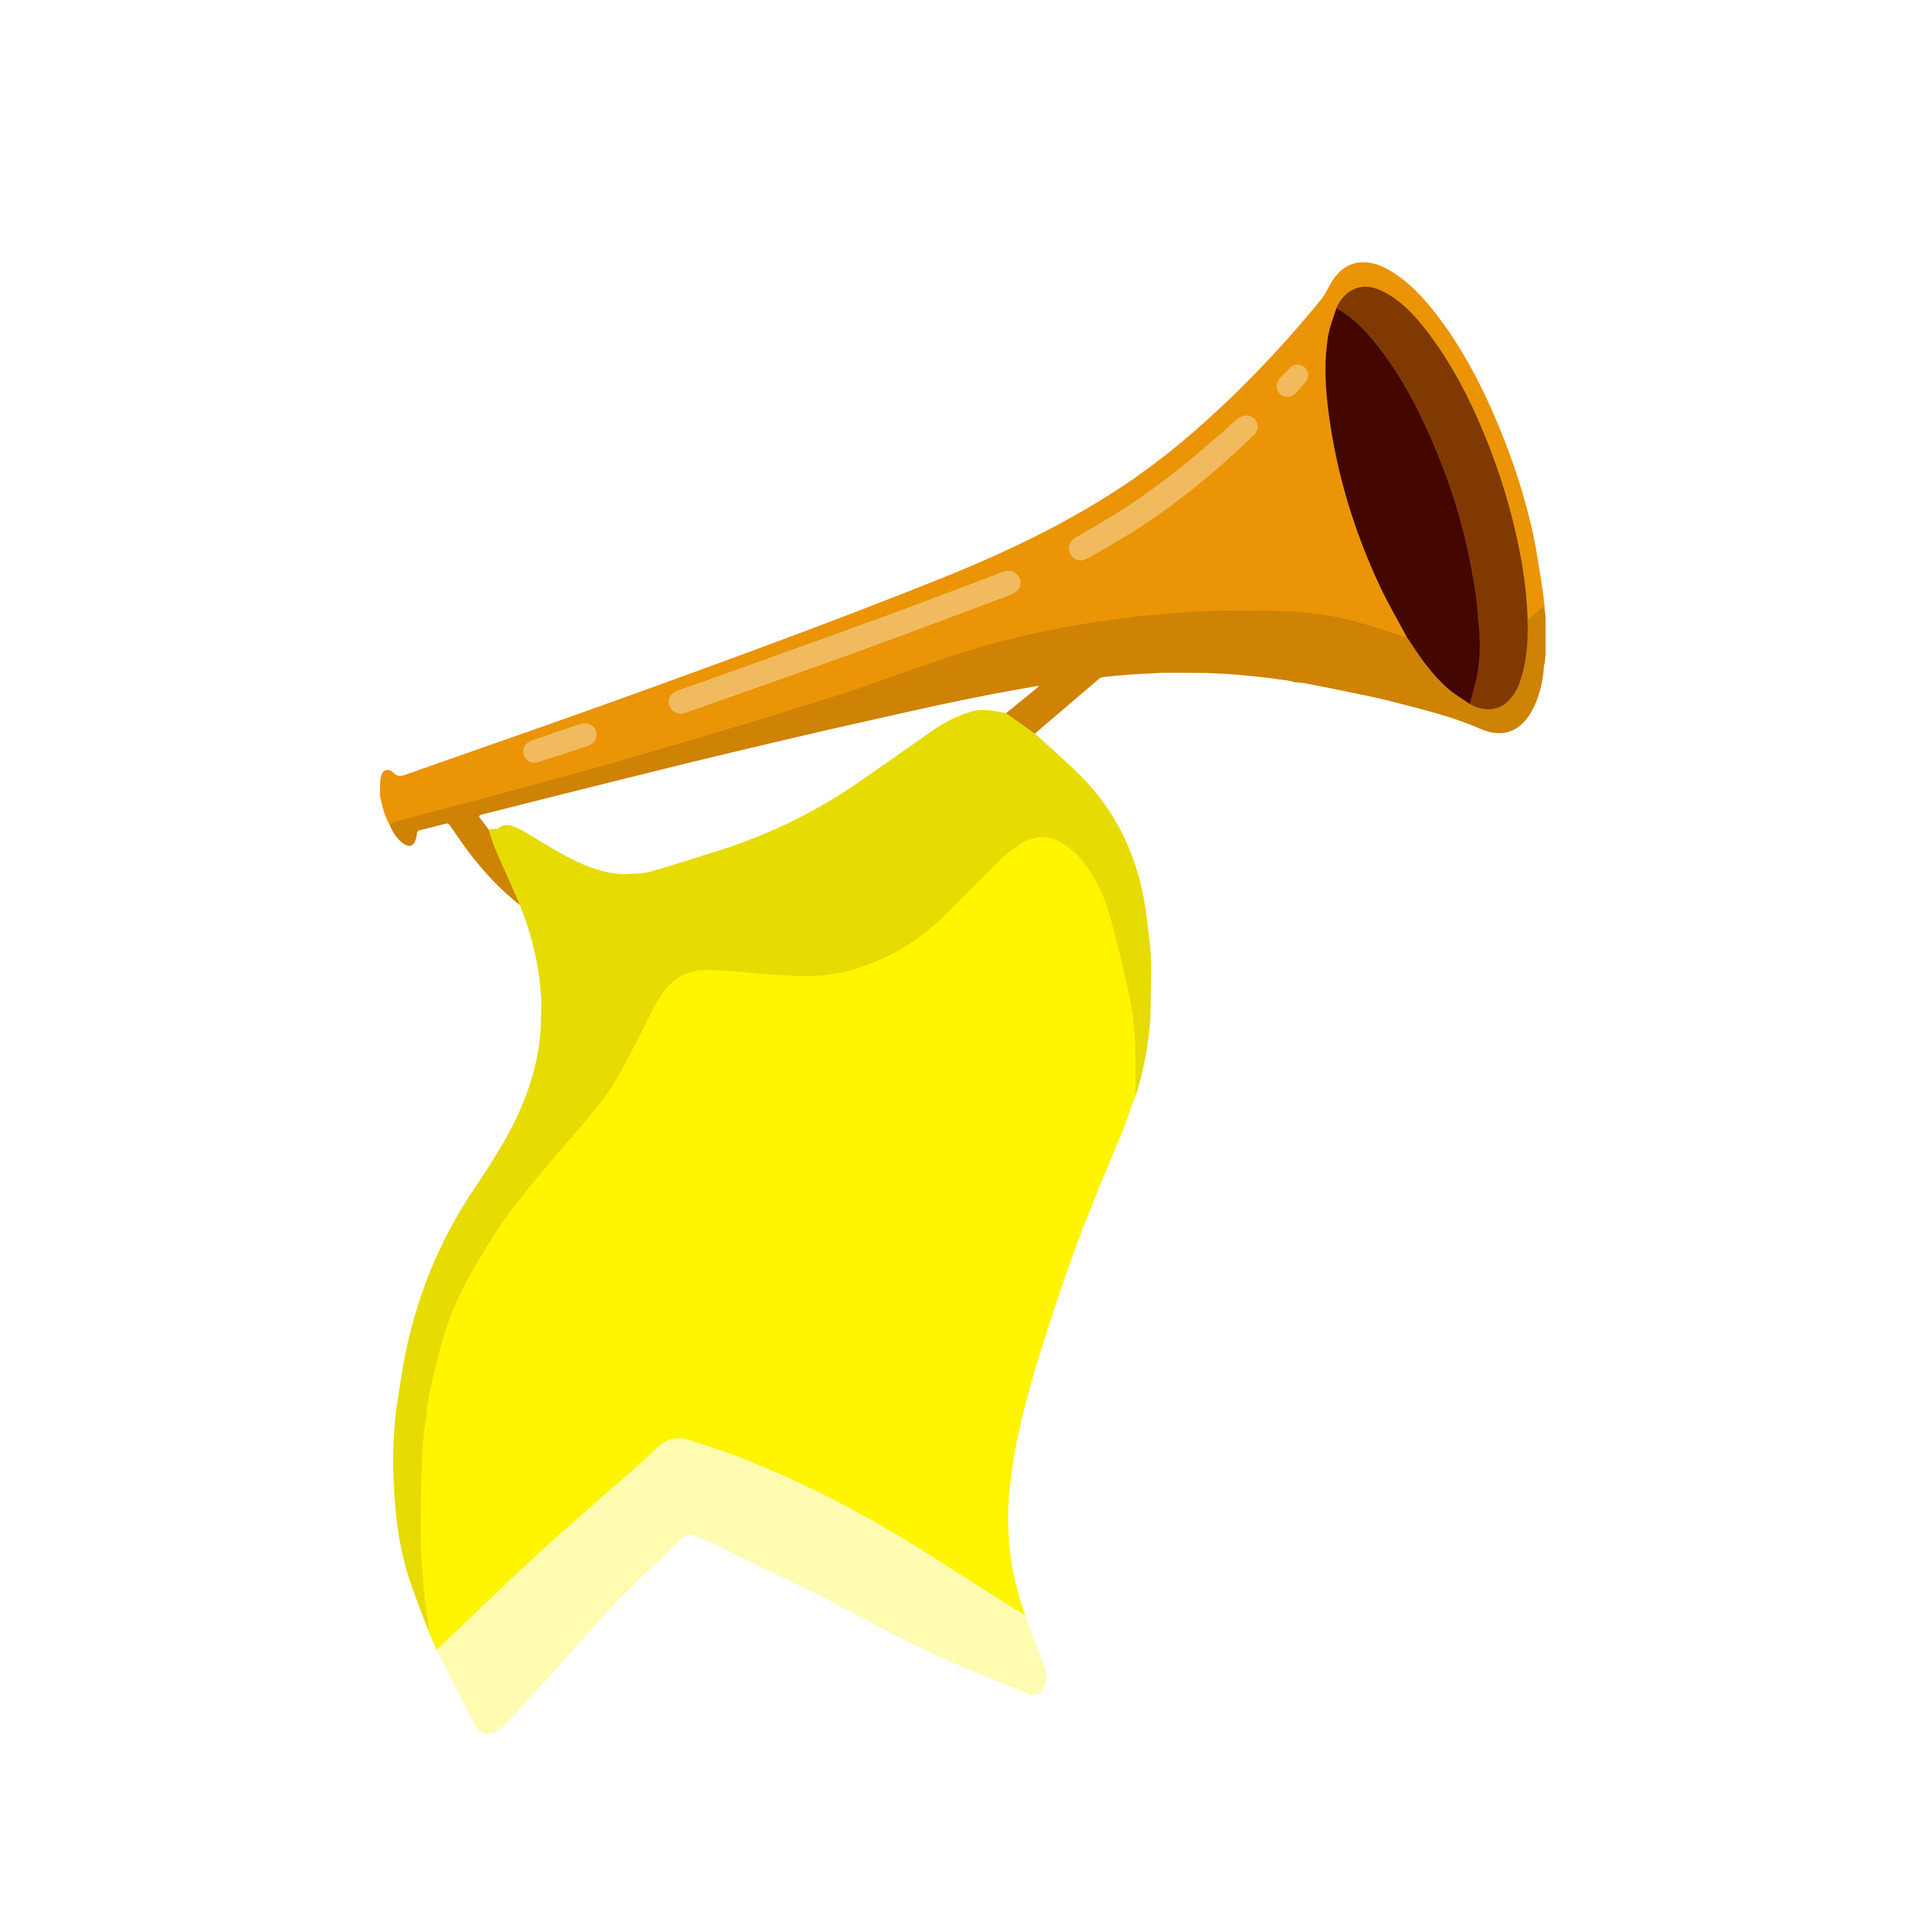 https://static.vecteezy.com/system/resources/previews/027/893/966/original/trumpet-musical-instrument-golden-horn-with-yellow-flag-solemn-event-element-of-celebration-and-awards-sound-and-melody-flat-cartoon-illustration-vector.jpg